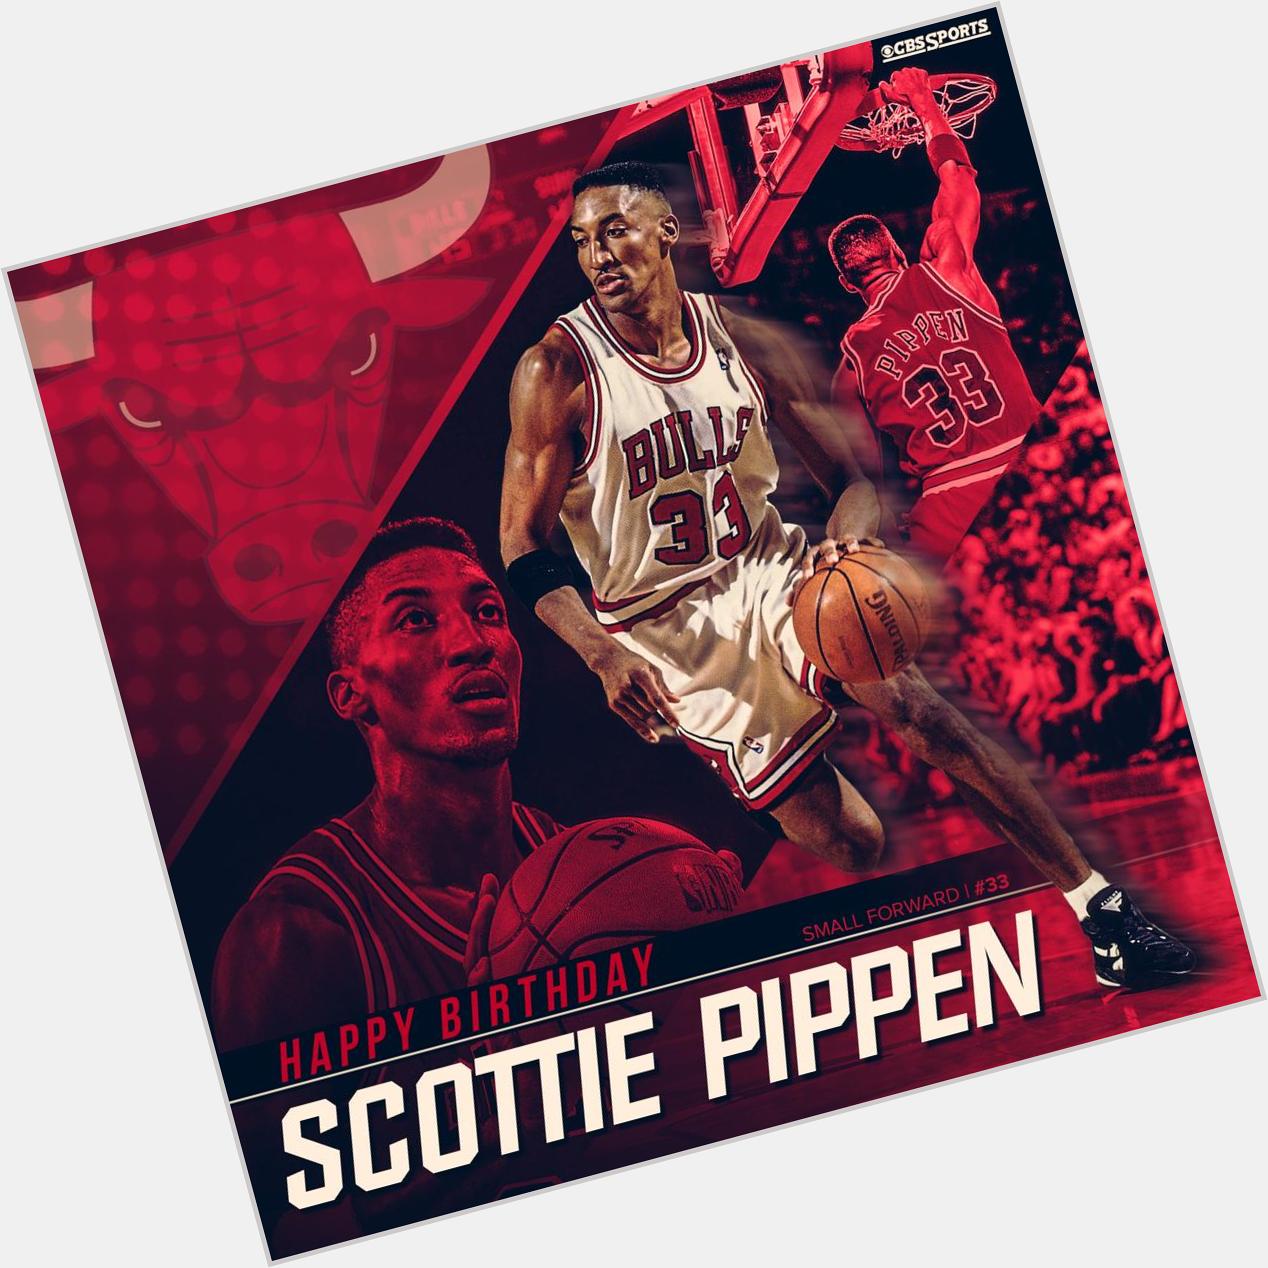 Happy 50th birthday to an all-time great: Scottie Pippen! 